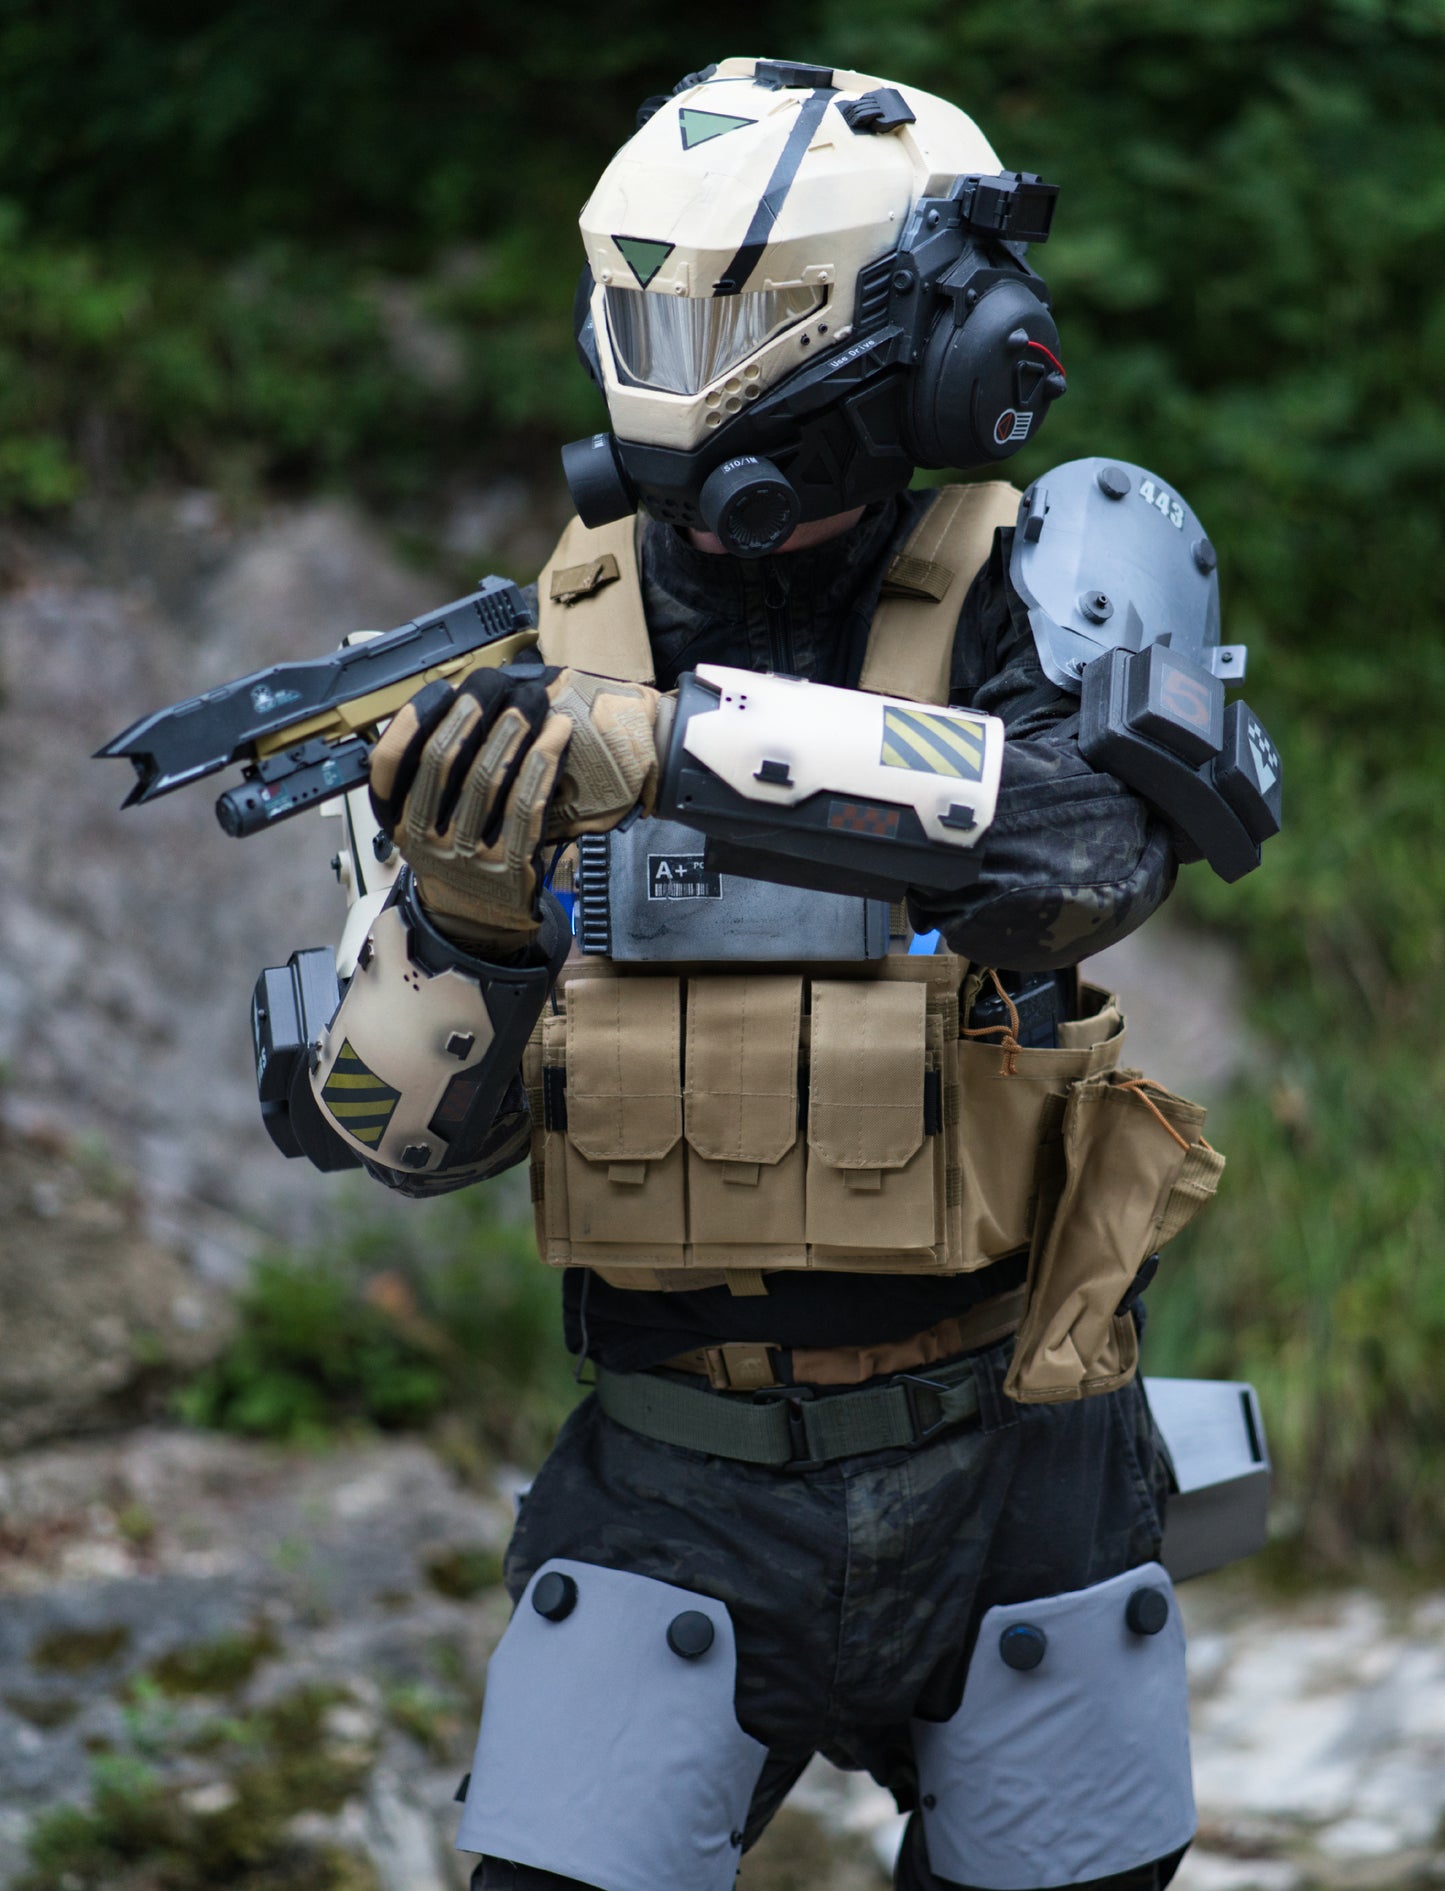 Premium fanmade "Pulse Blade Pilot" Airsoft/Cosplay Armor - Complete